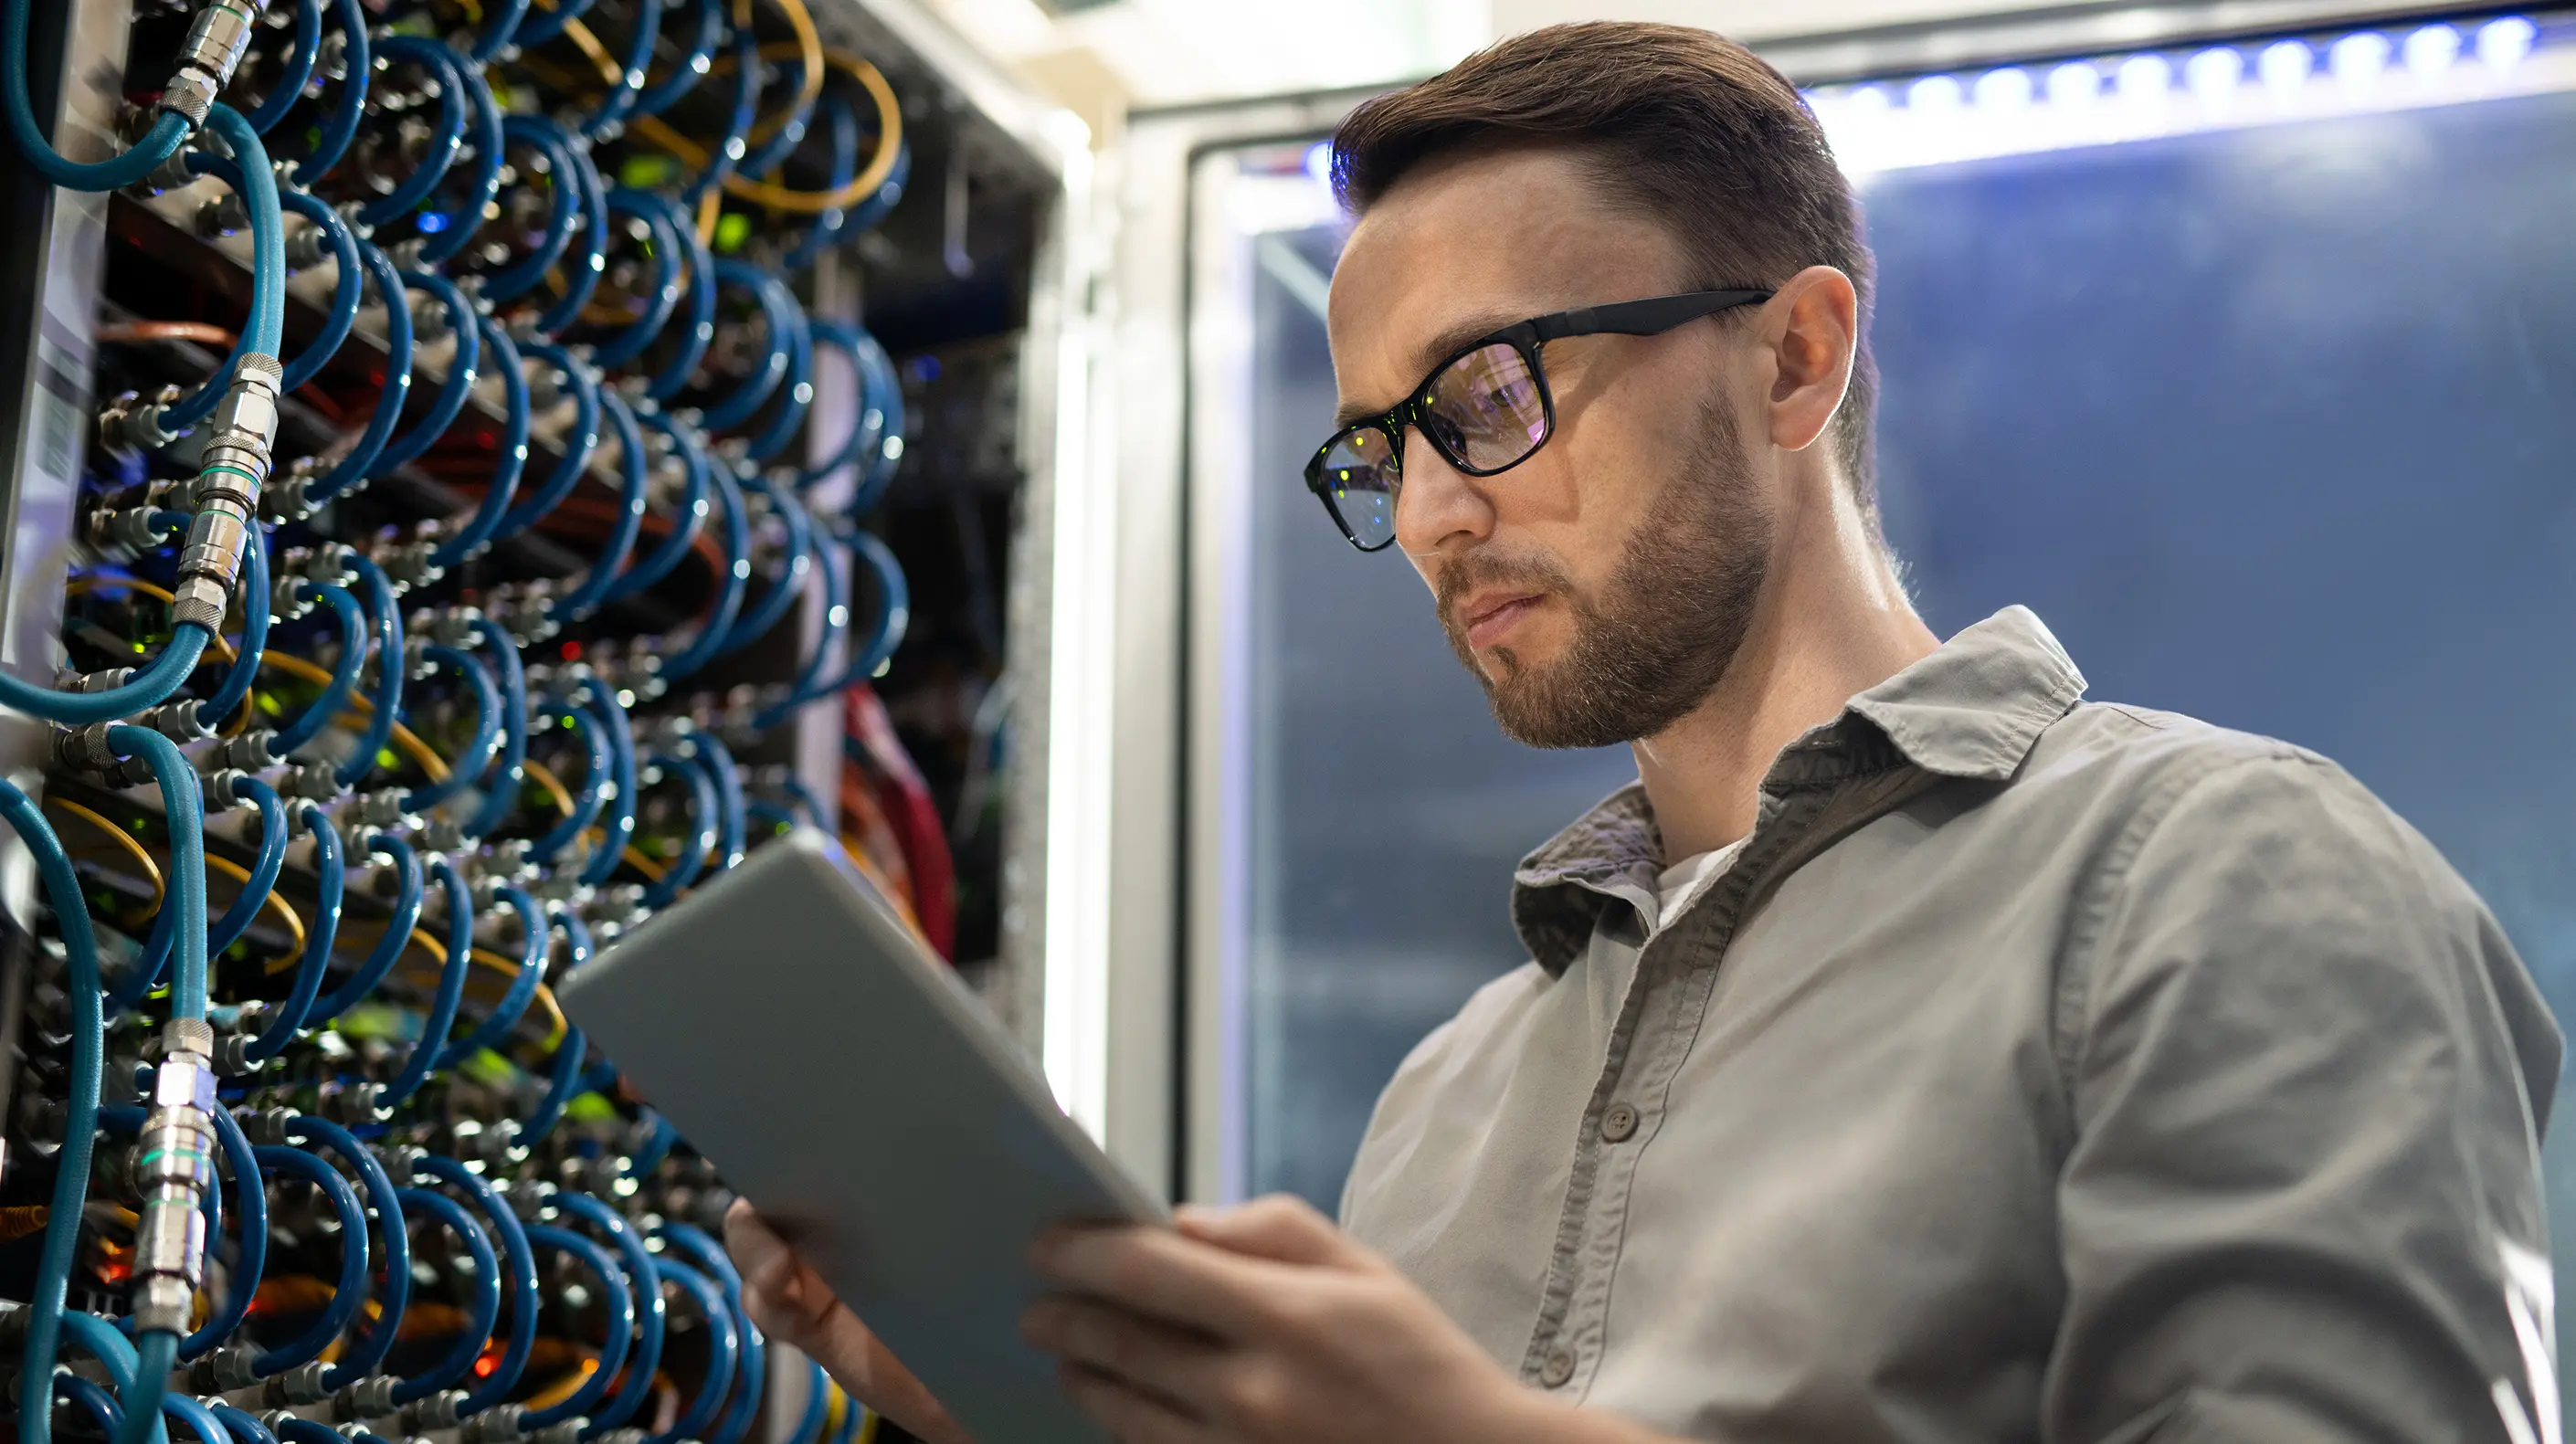 Network manager looking at a tablet while working on a server room's connections.